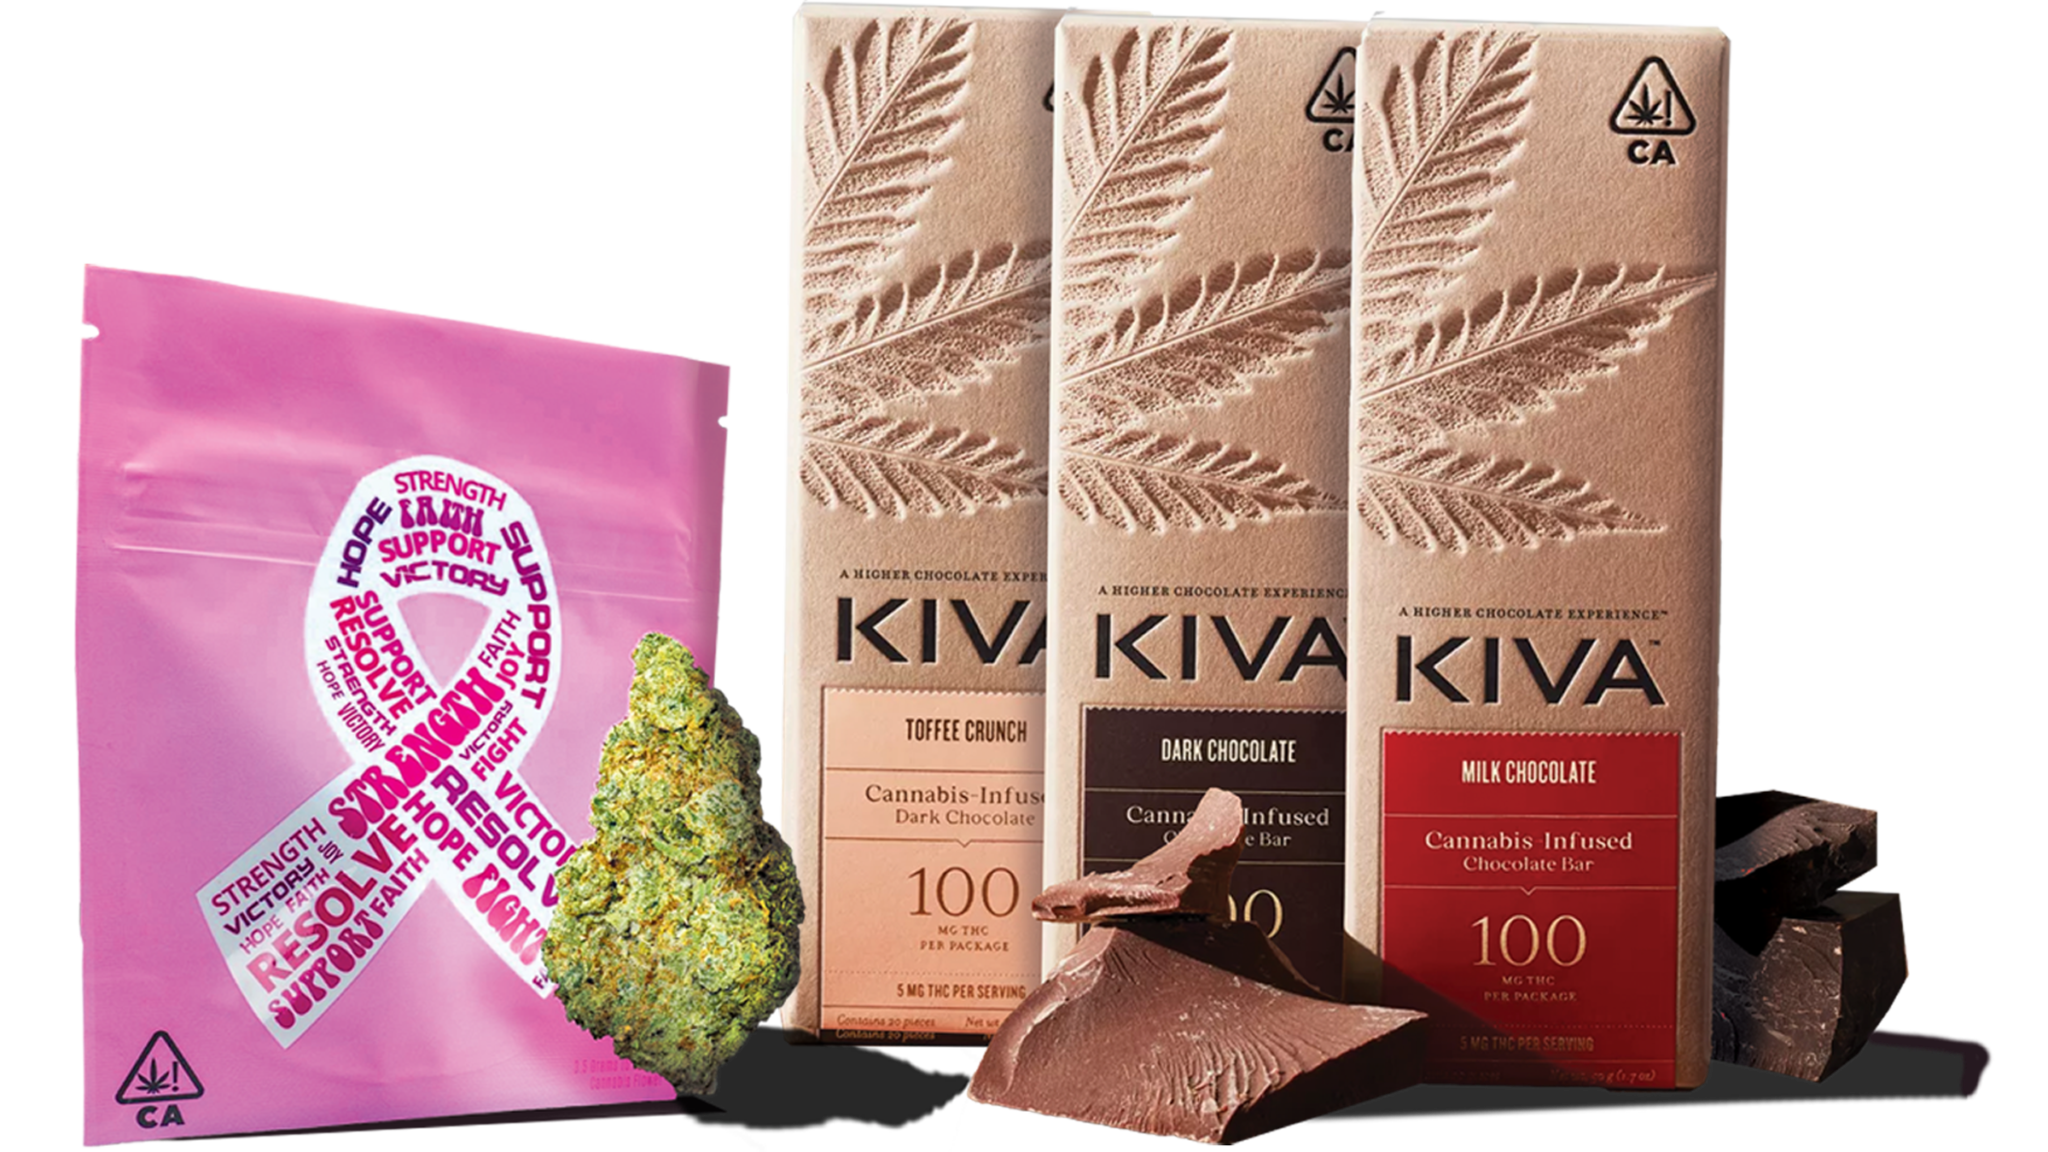 vibe-by-california-dispensary-near-me-always-420-mothers-day-pretty-and-posh-8ths-special-kiva-chocolate-bar